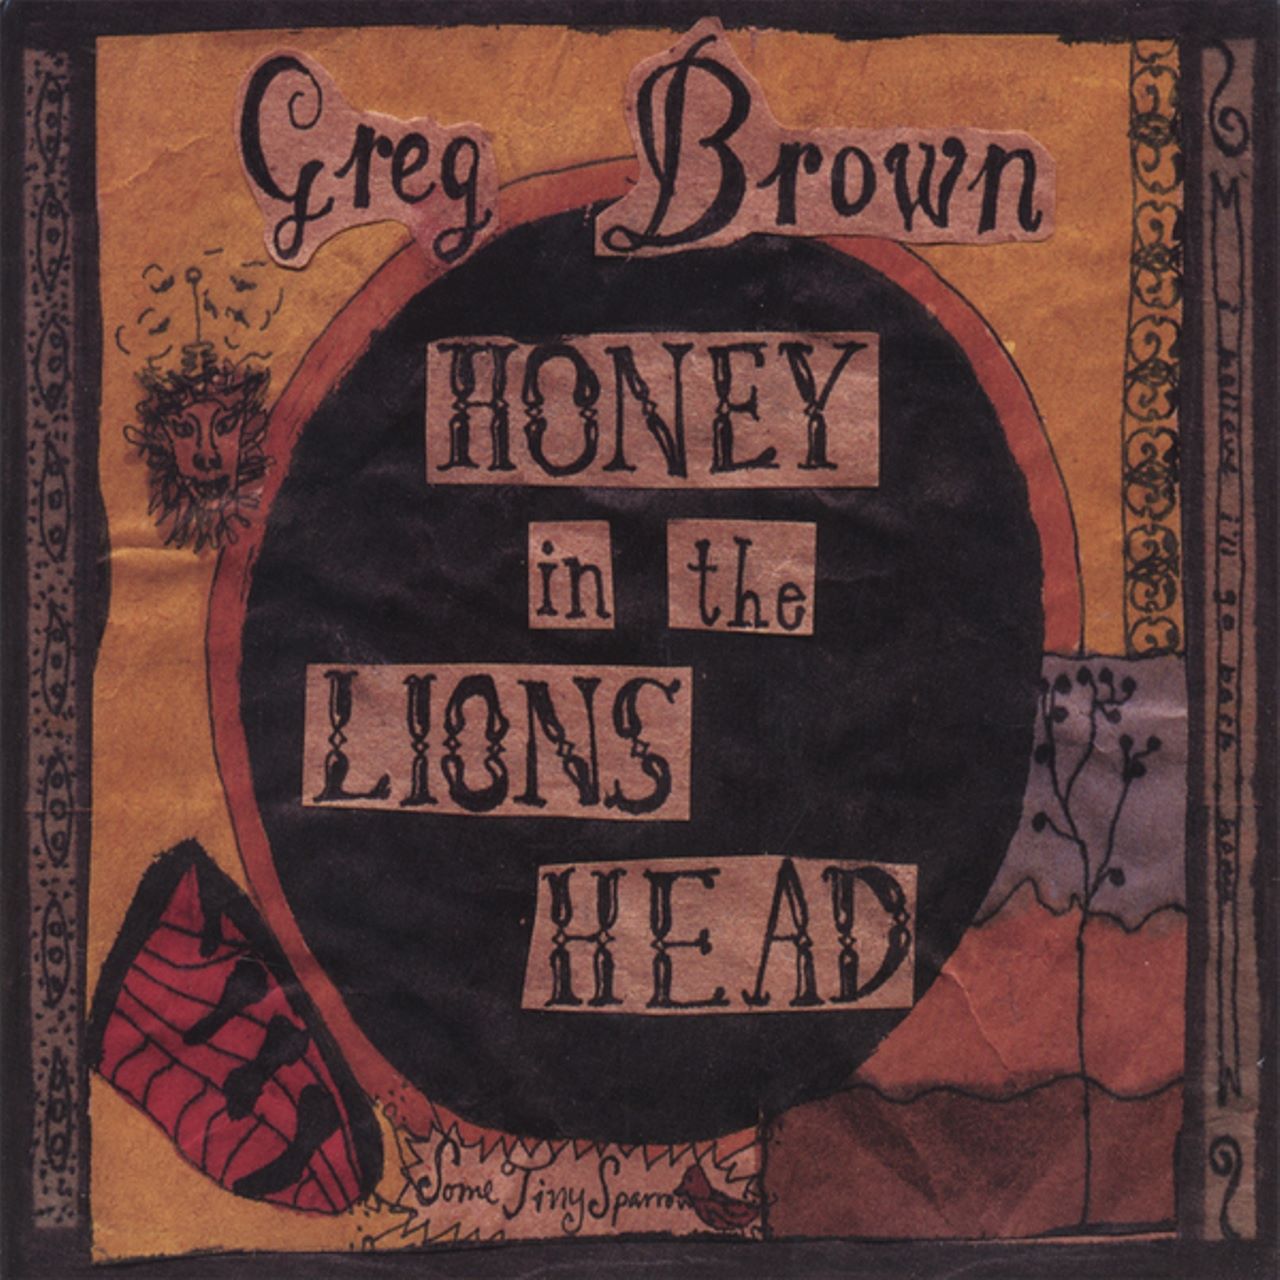 Greg Brown - Honey In The Lions Head cover album